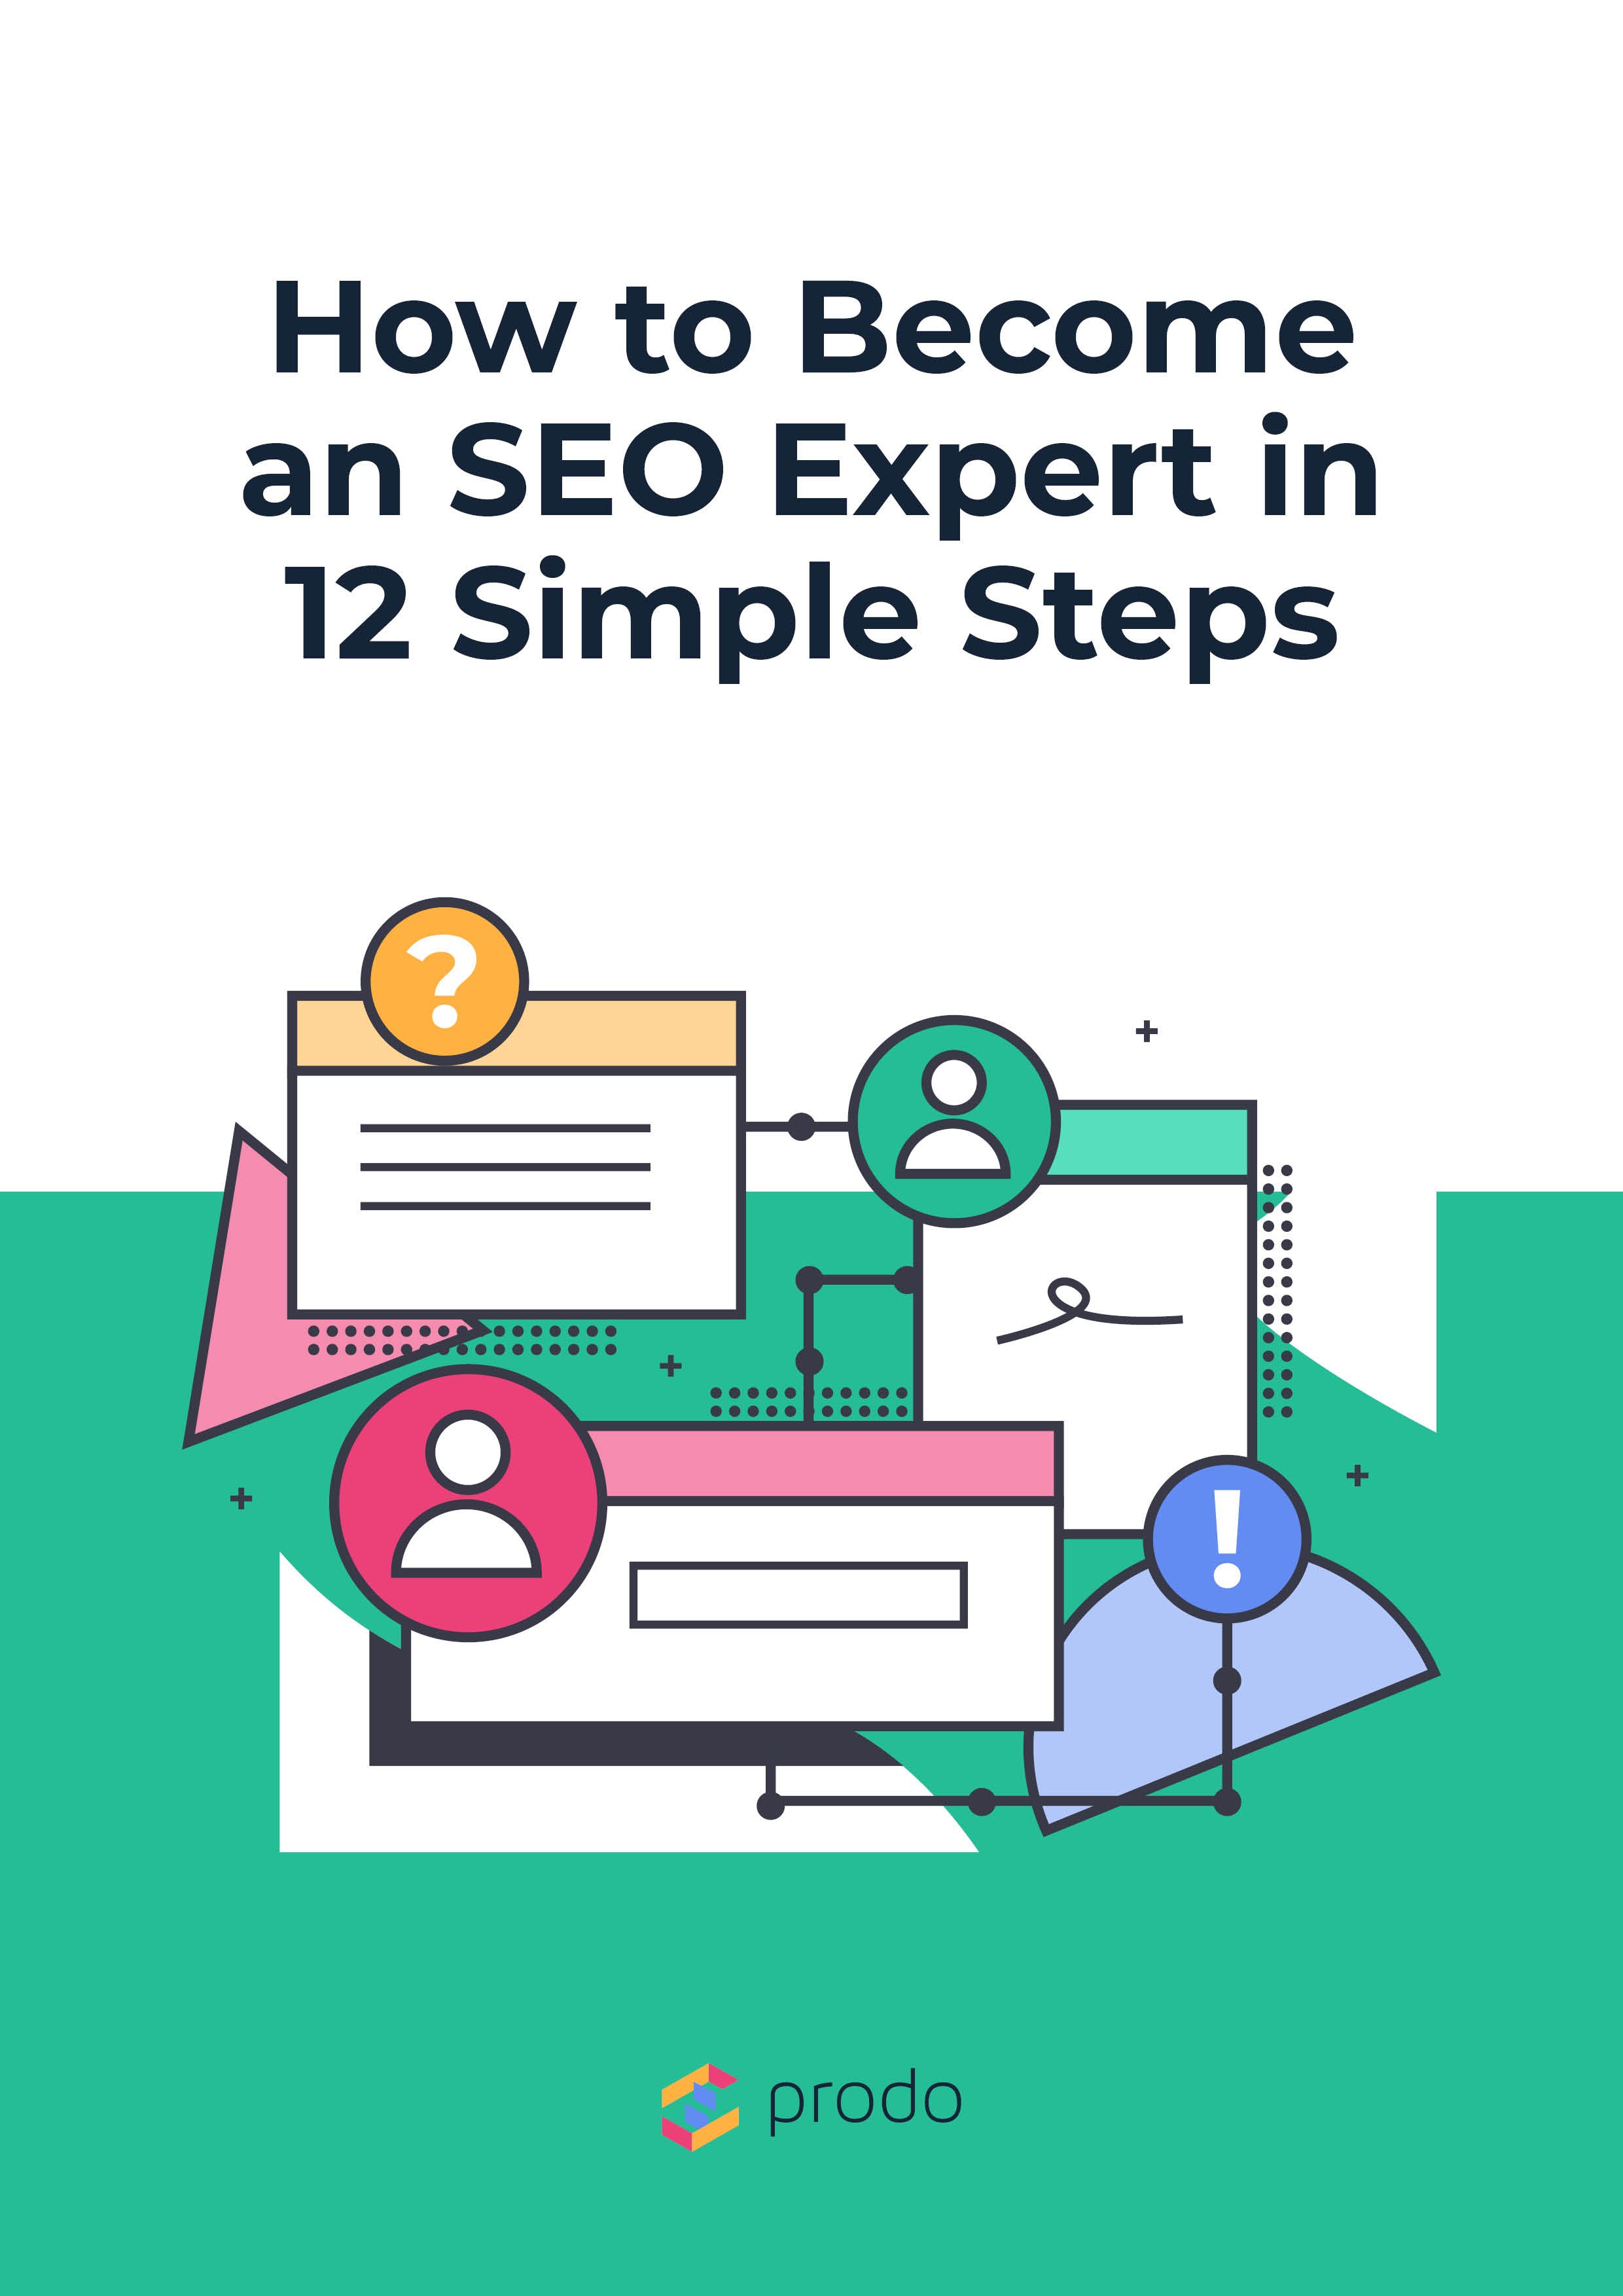 Prodo How to become an SEO expert in 12 simple steps eBook